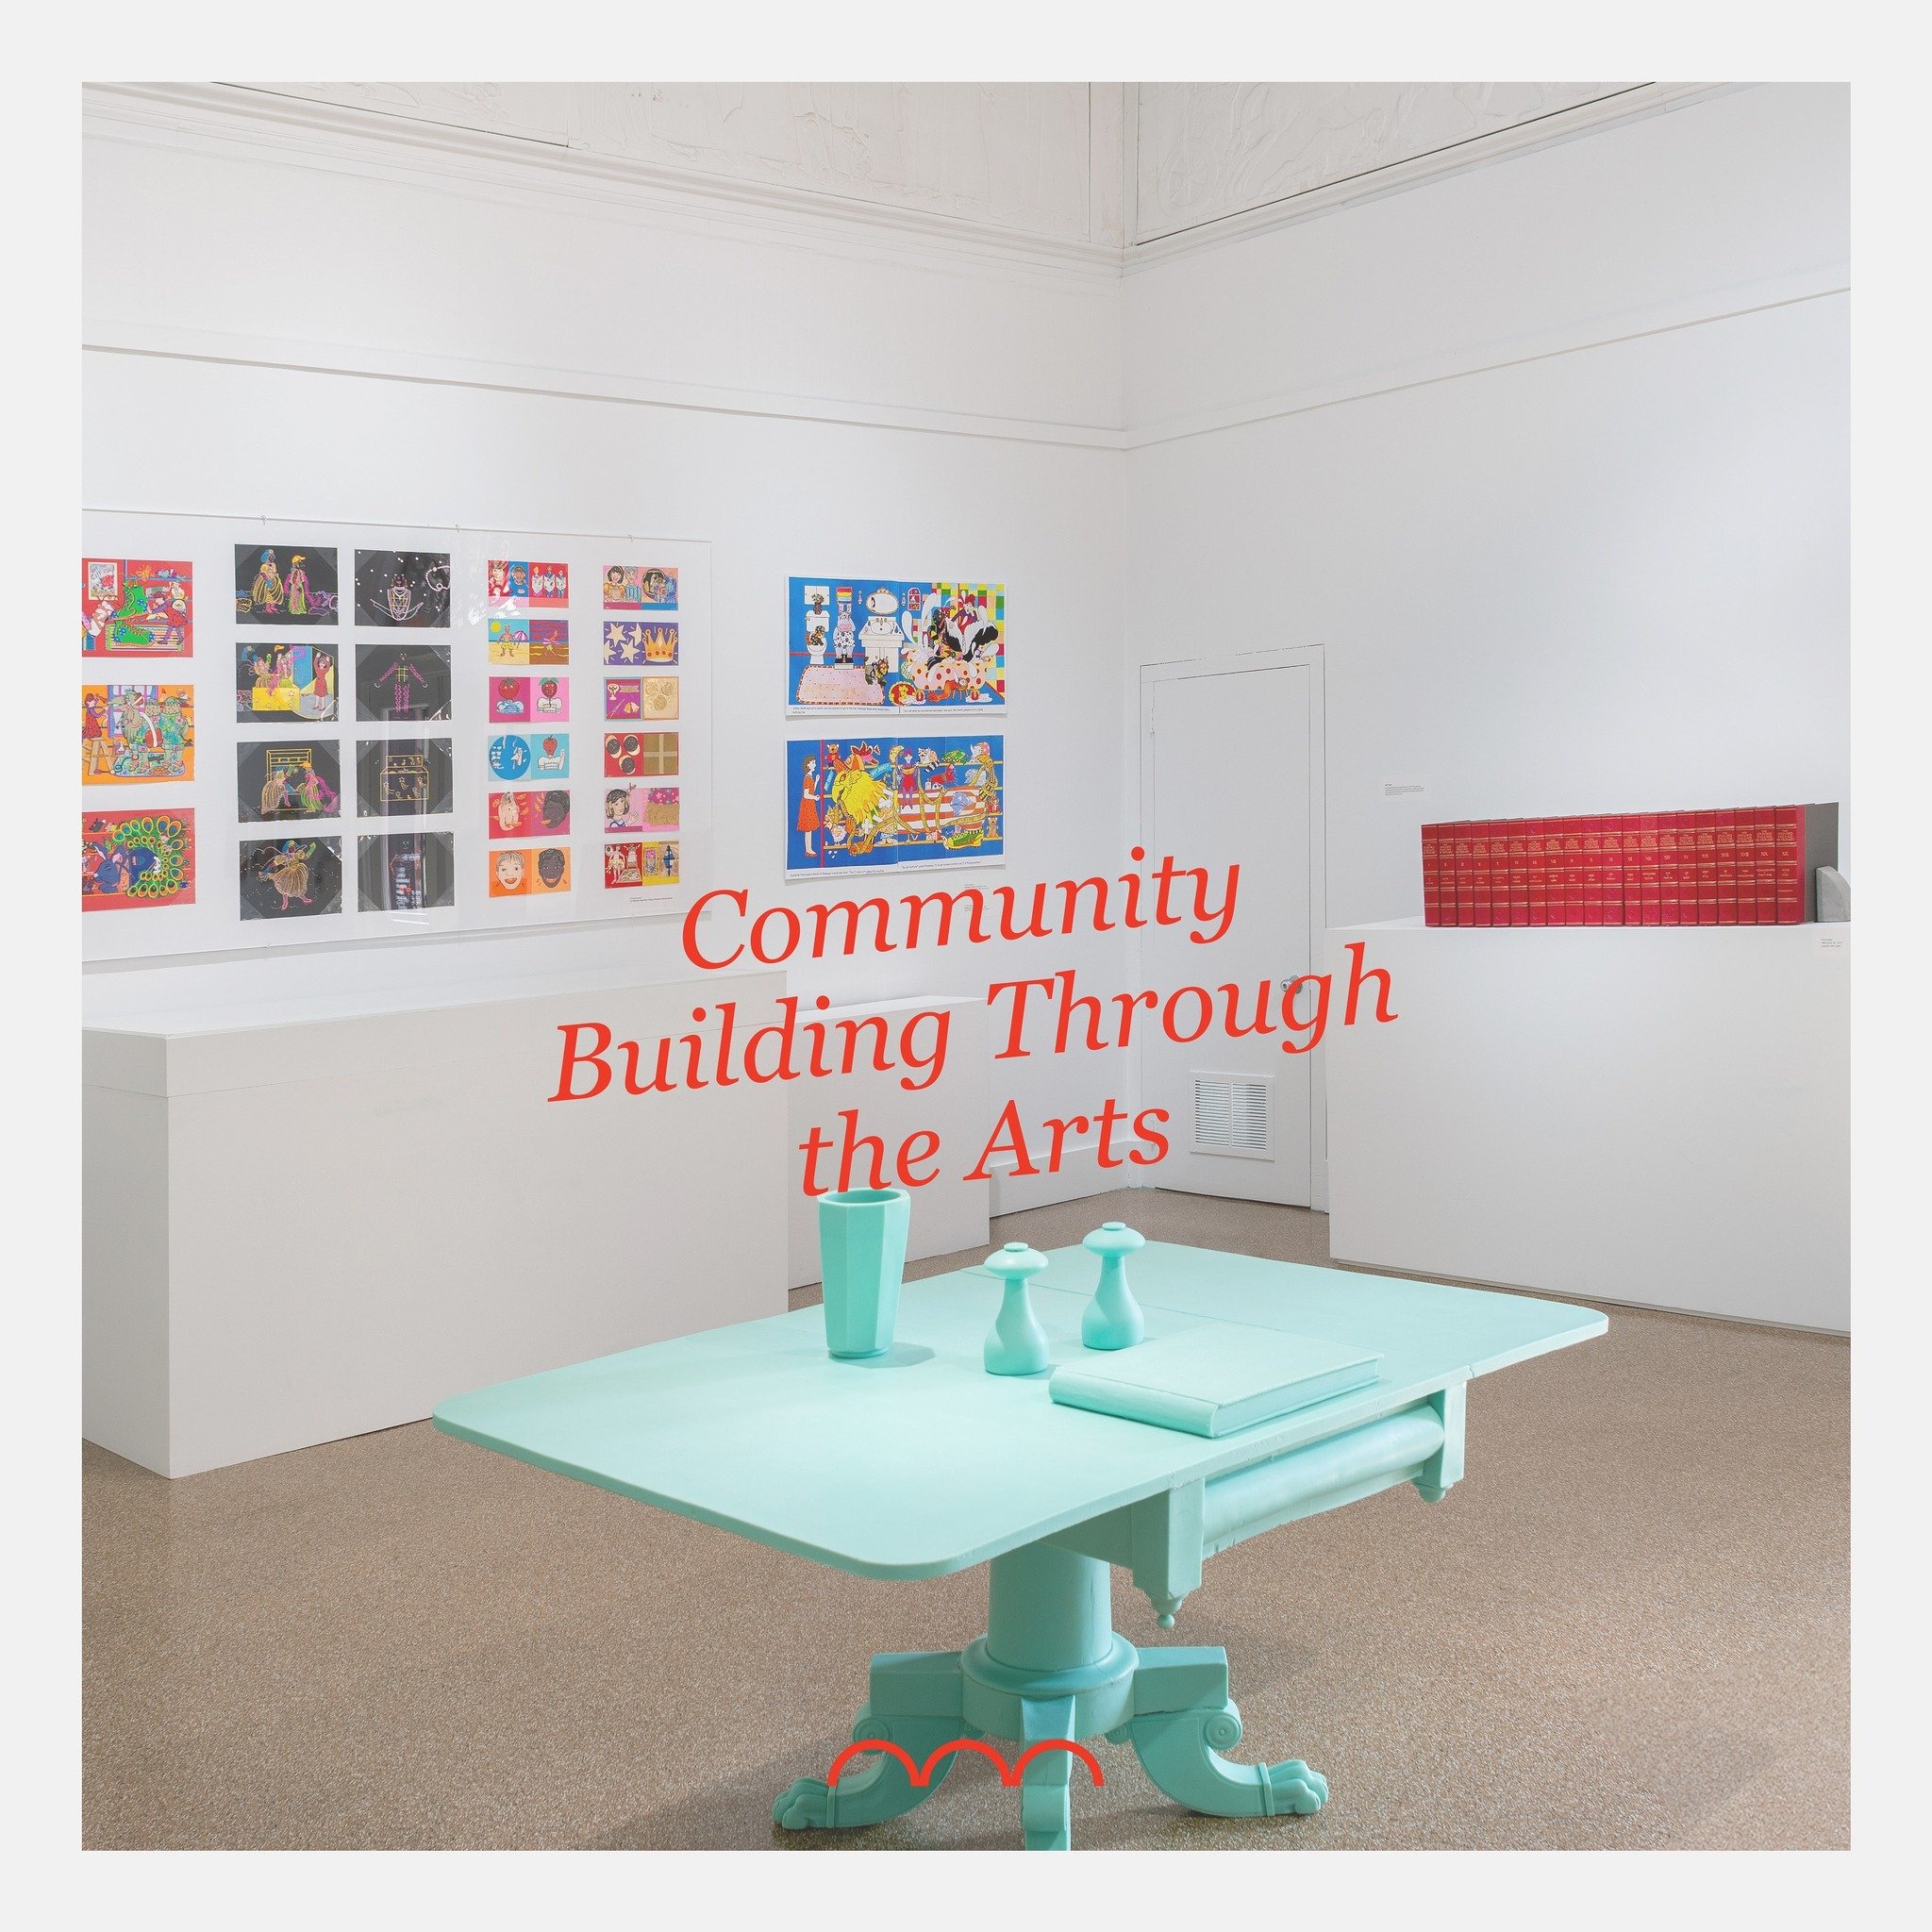 Embark on an inspiring journey of community enrichment through the transformative power of the arts with us.

At Southampton Arts Center, we believe in the transformative power of creativity to unite, inspire, and uplift. Explore our vibrant exhibiti